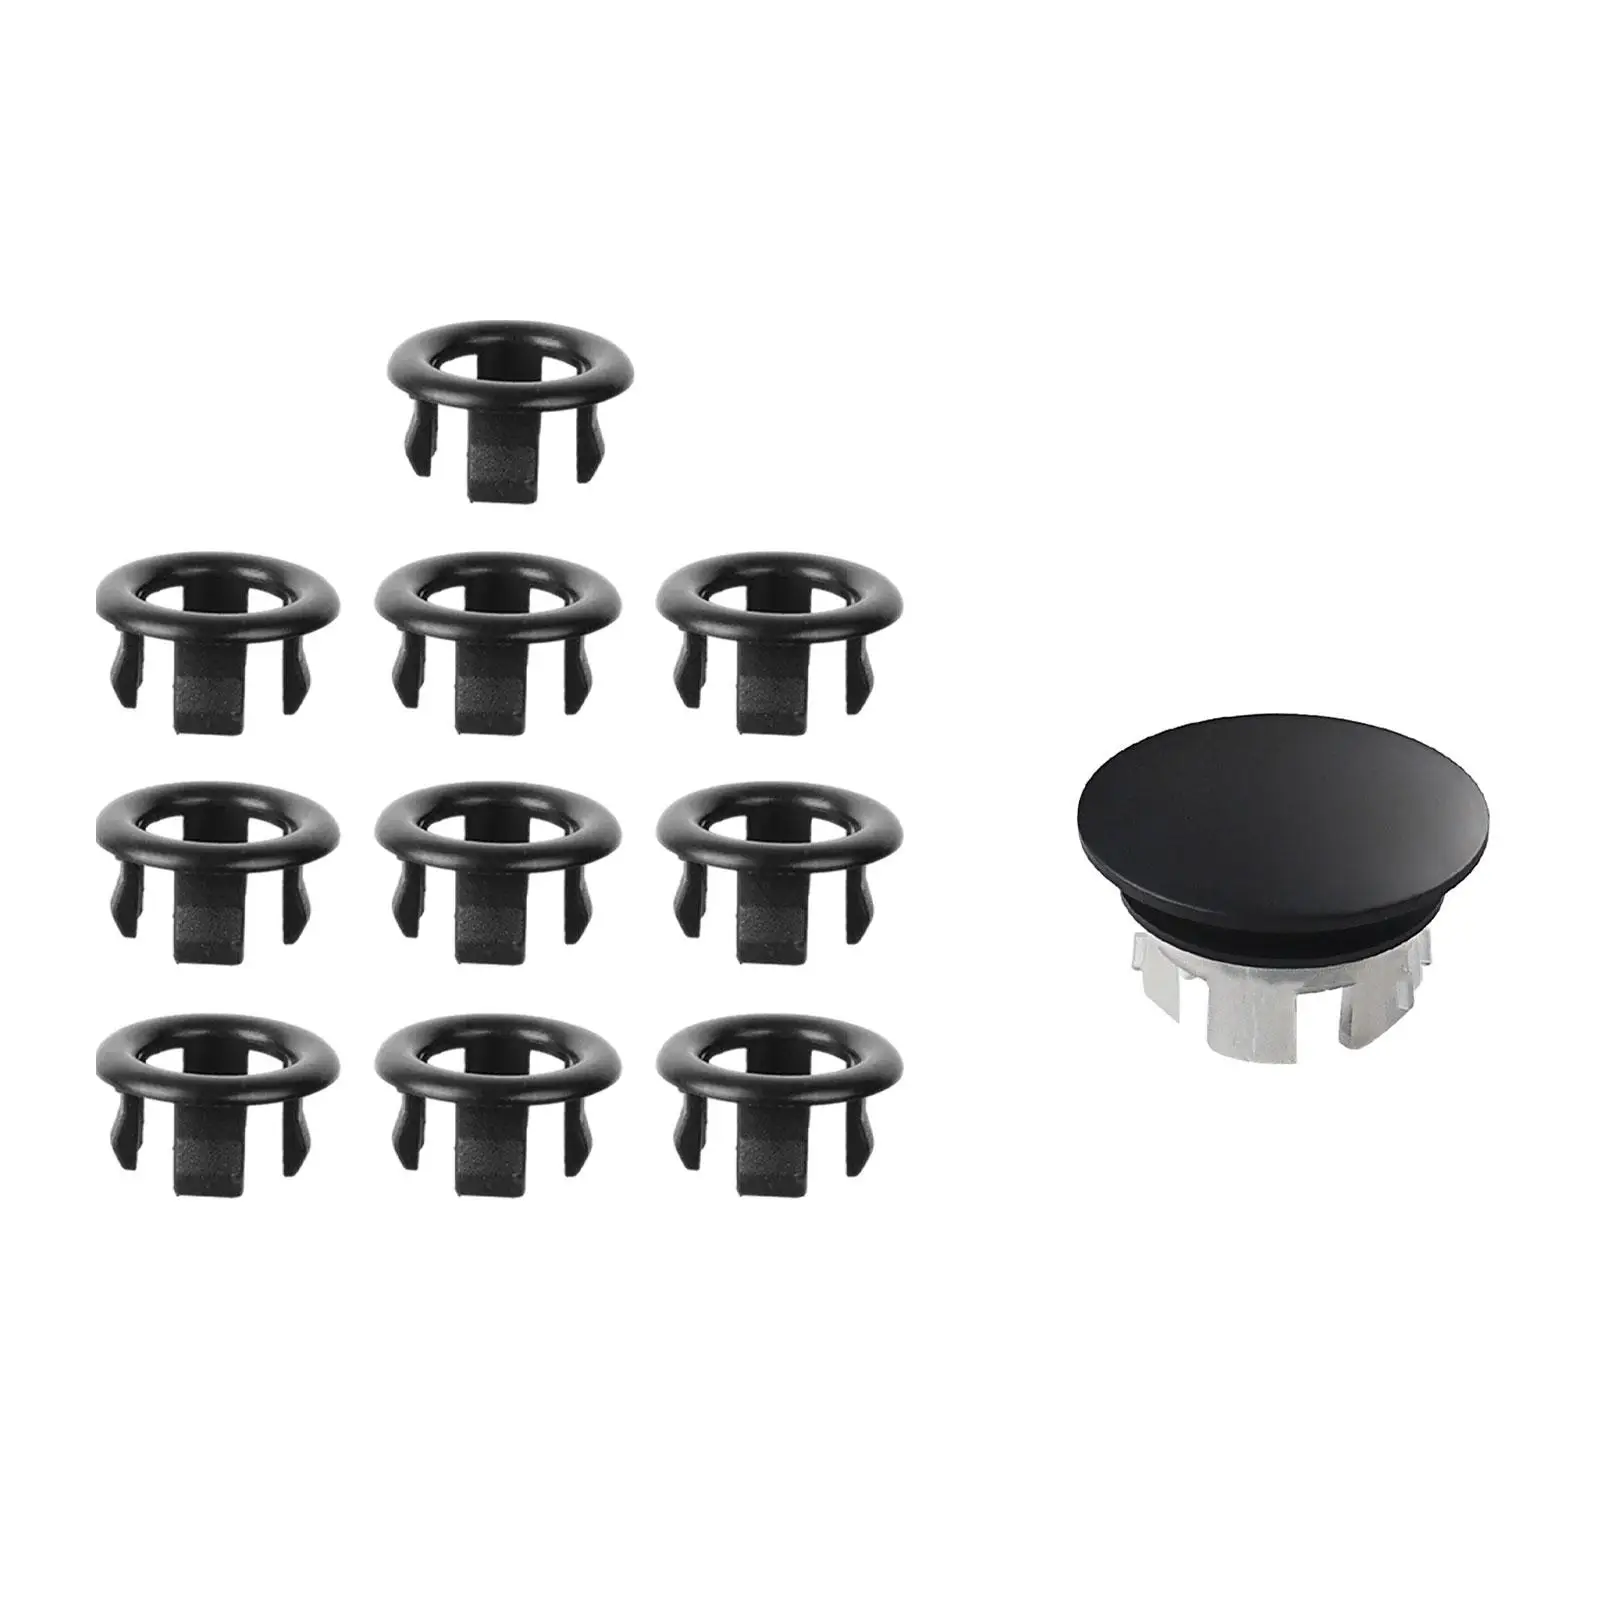 

10x Sink Overflow Trim Ring Drain Overflow Cover Sink Hole Cover Hole Insert Cap for Lavatory Bathroom Bathtub Kitchen Hotel